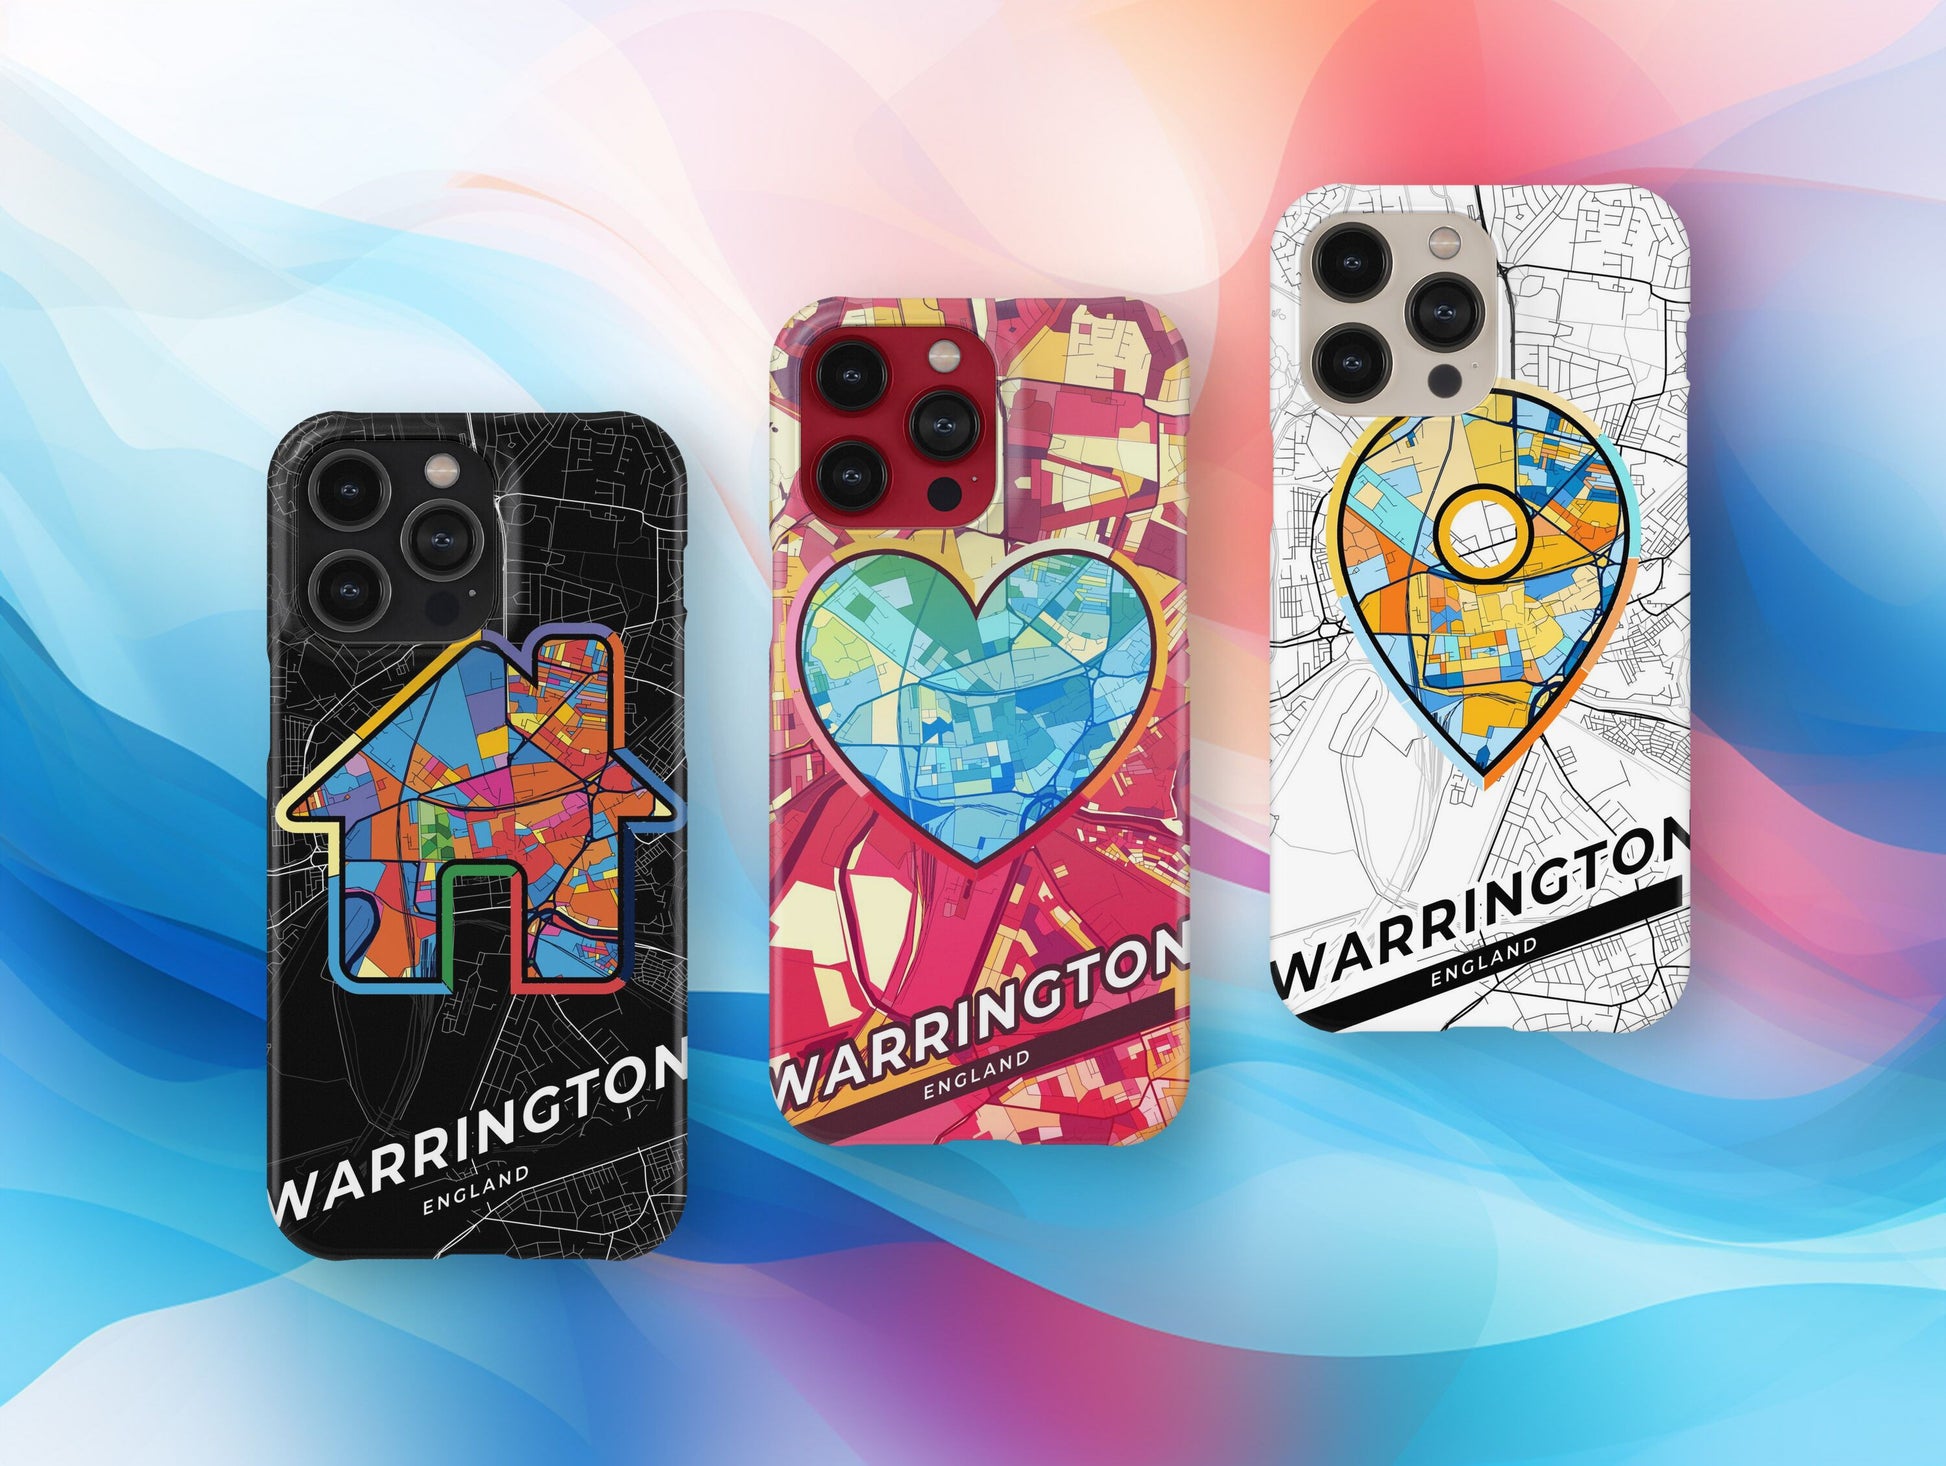 Warrington England slim phone case with colorful icon